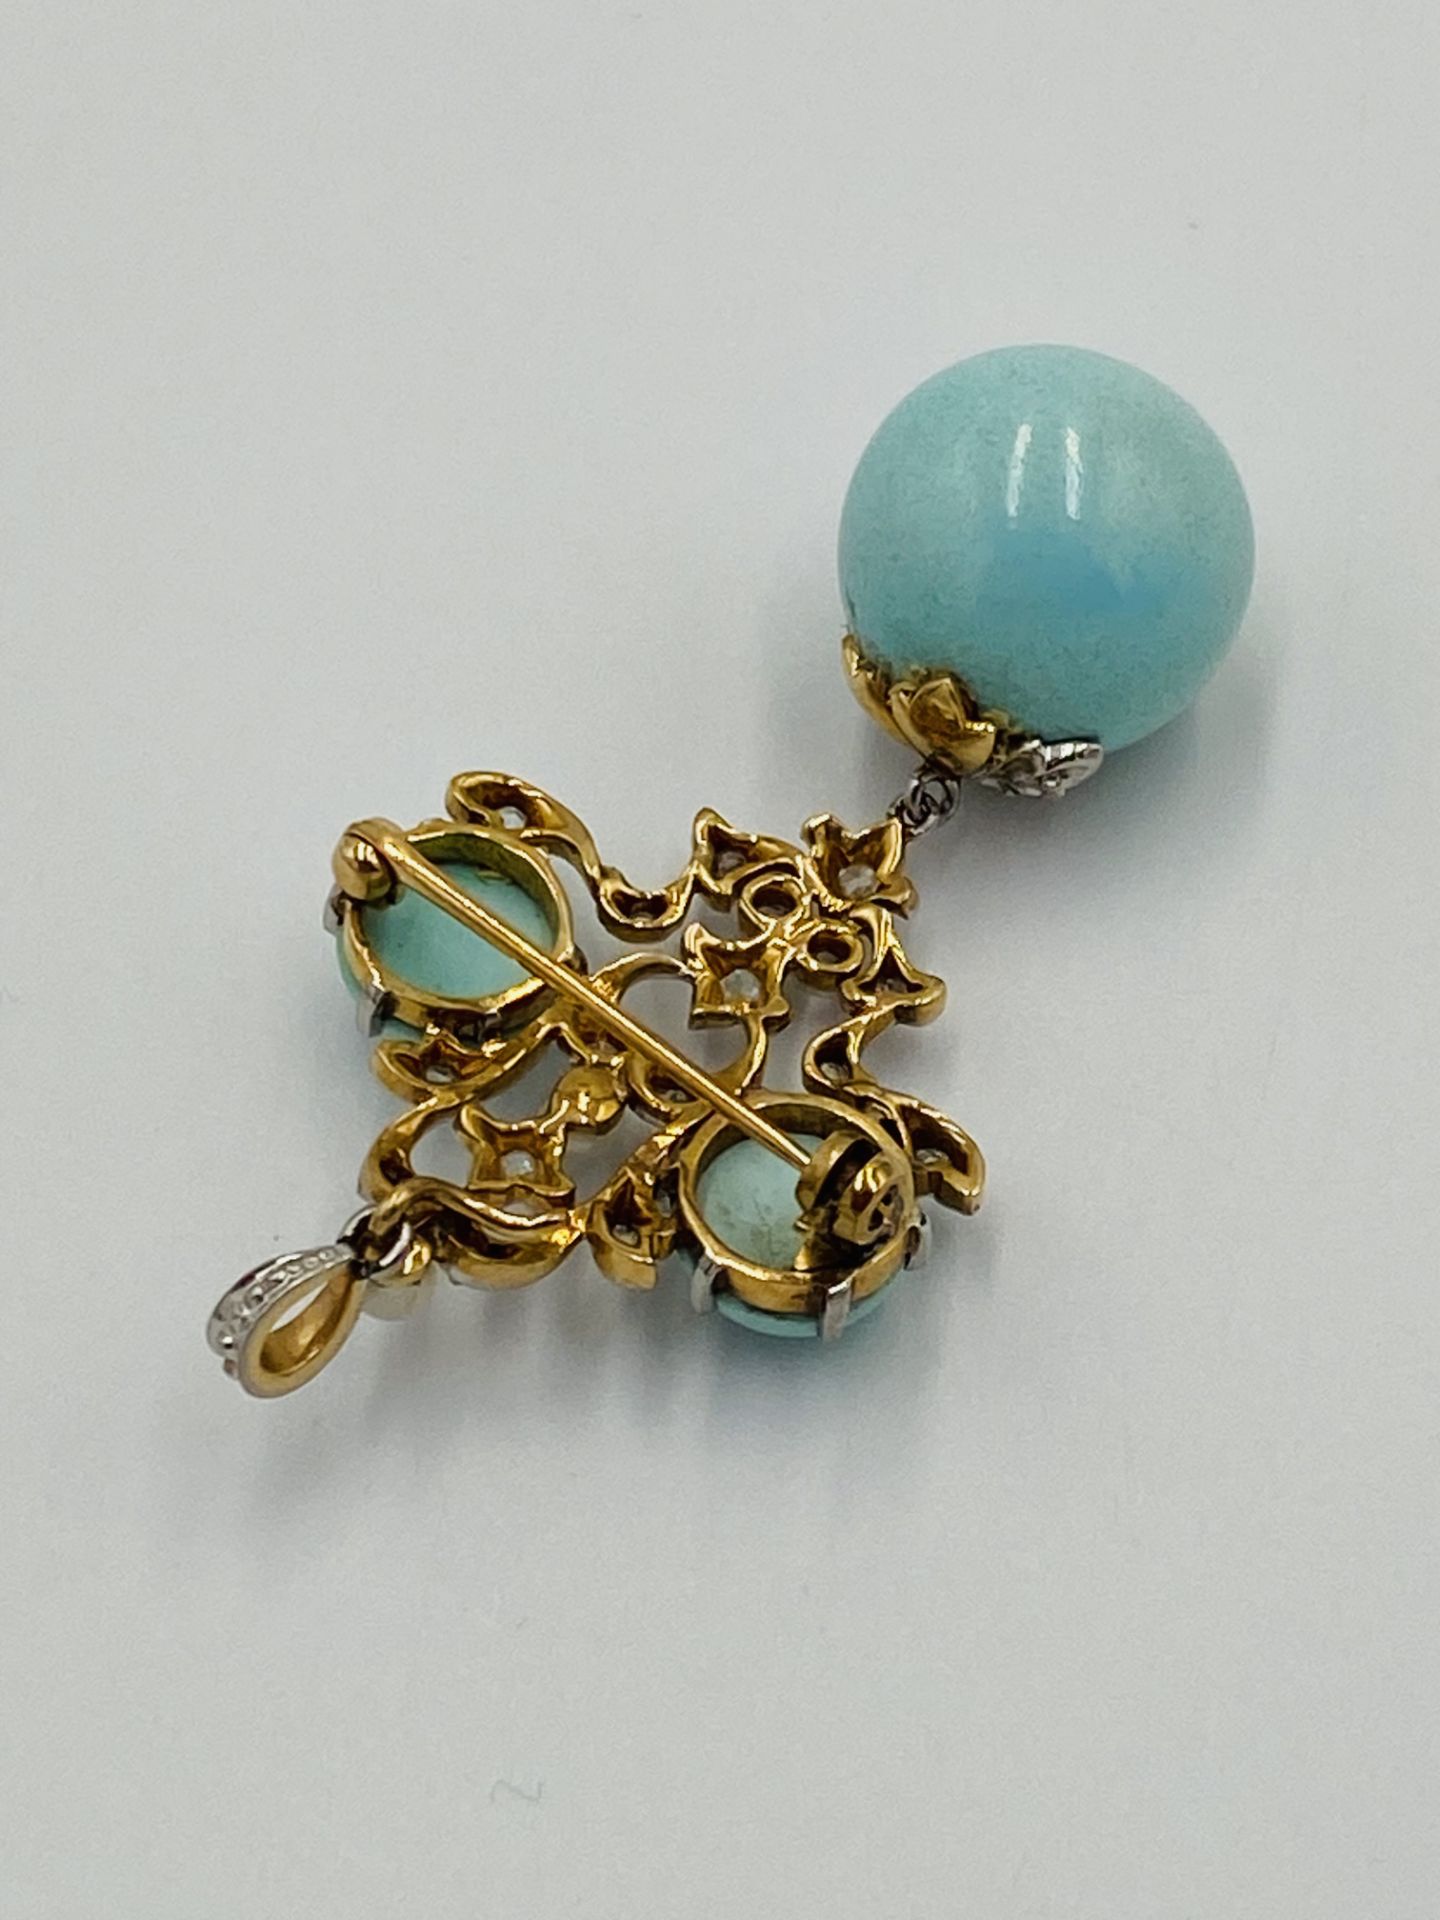 Turquoise and diamond brooch/pendant - Image 5 of 5